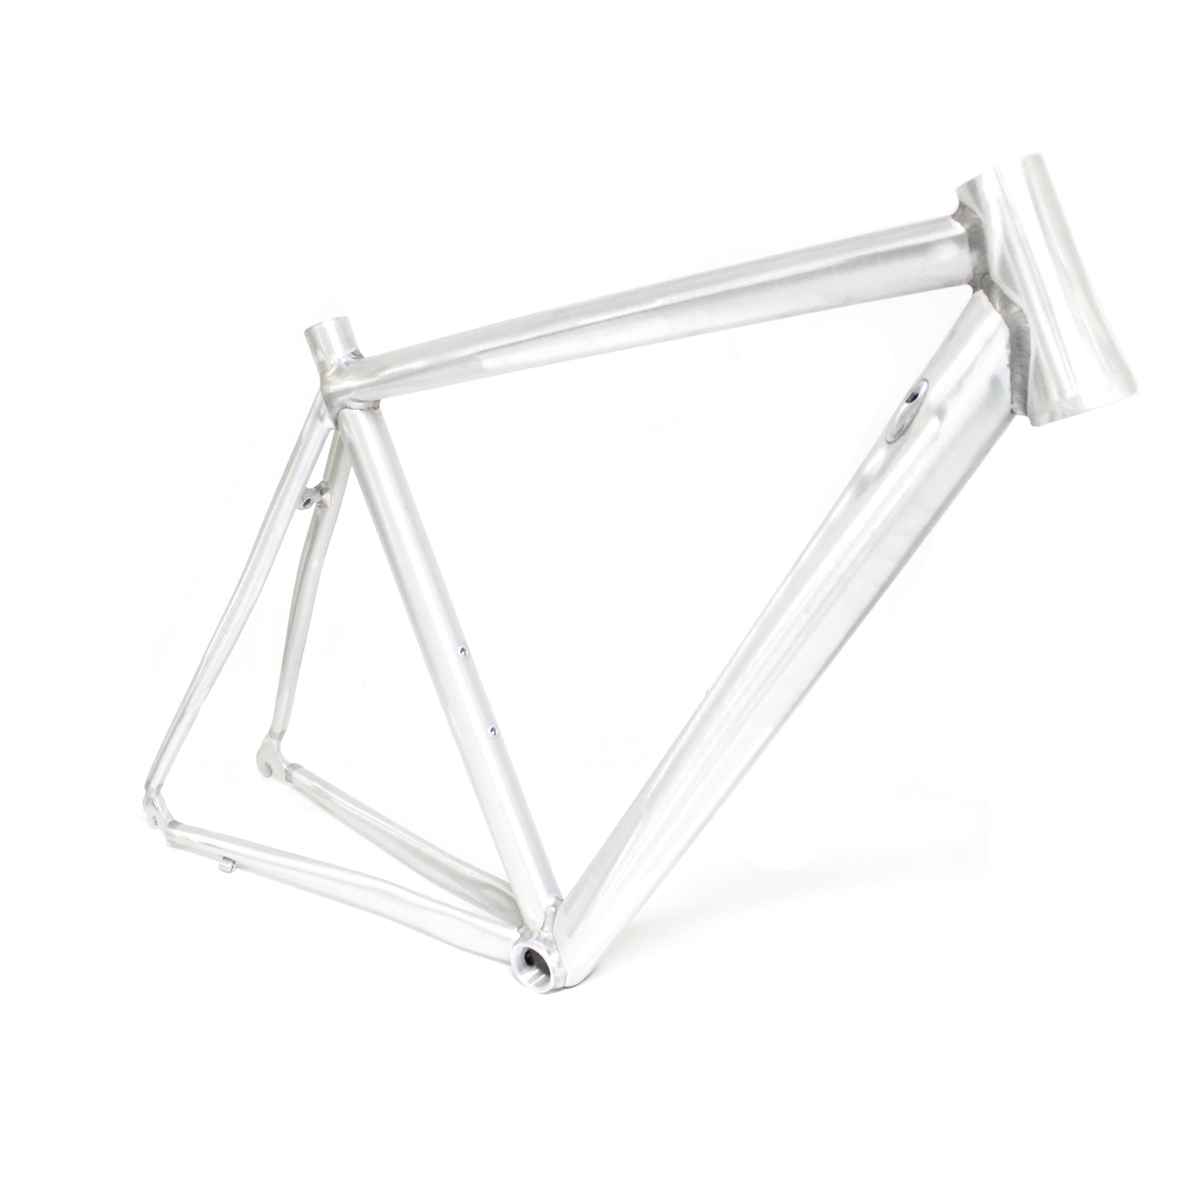 Road alloy tapered Caliper Frame size 57